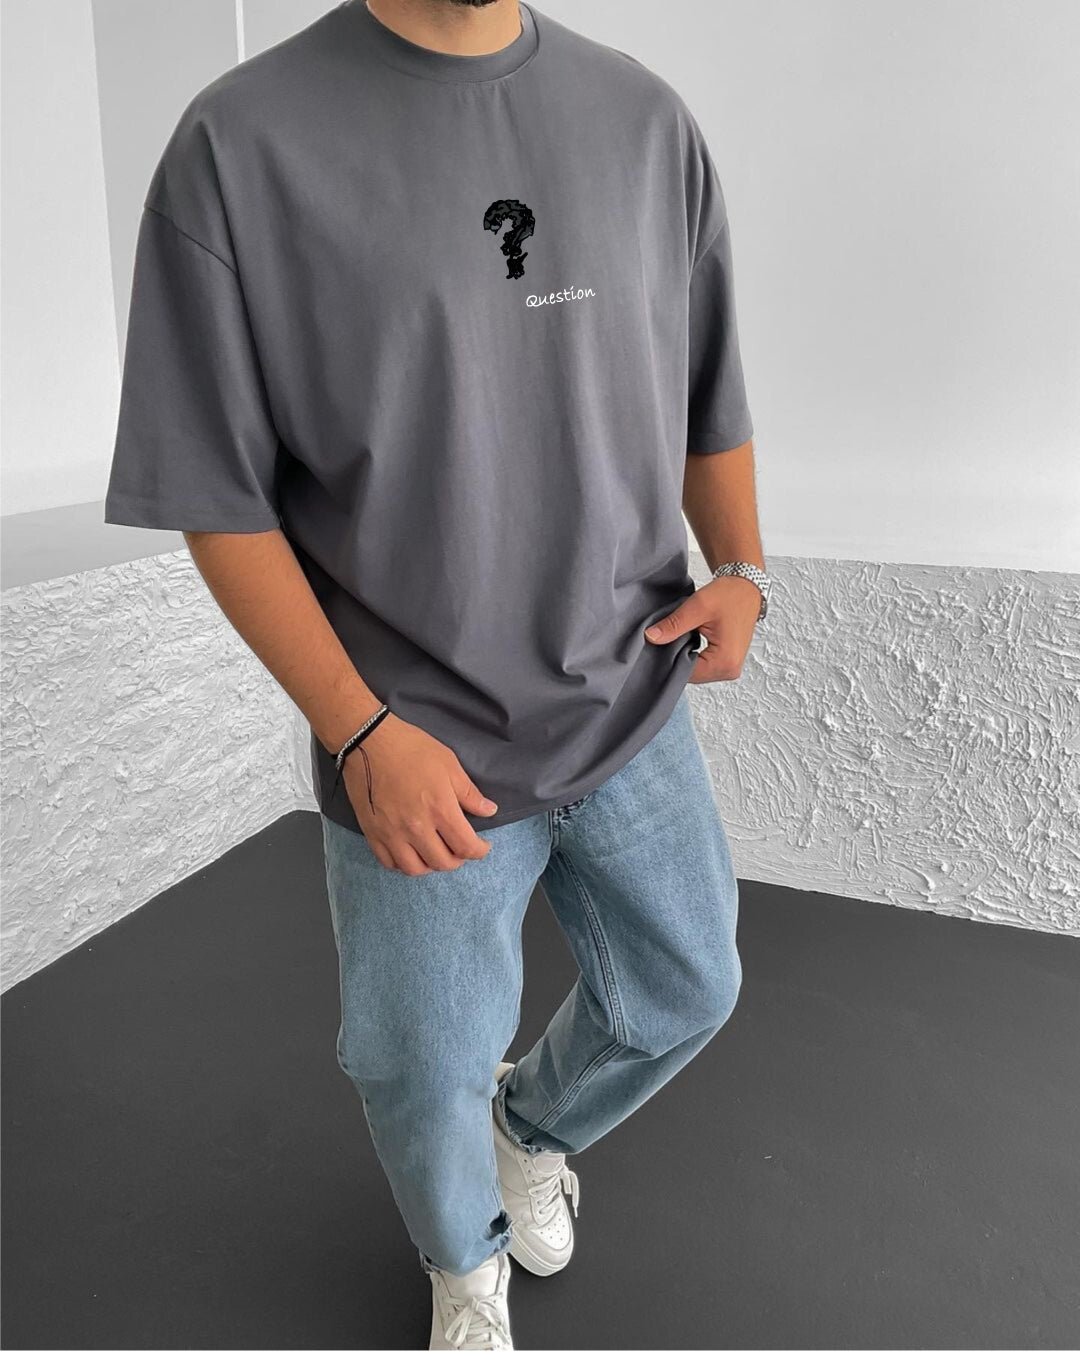 Smoked "Question" Printed Oversize T-Shirt